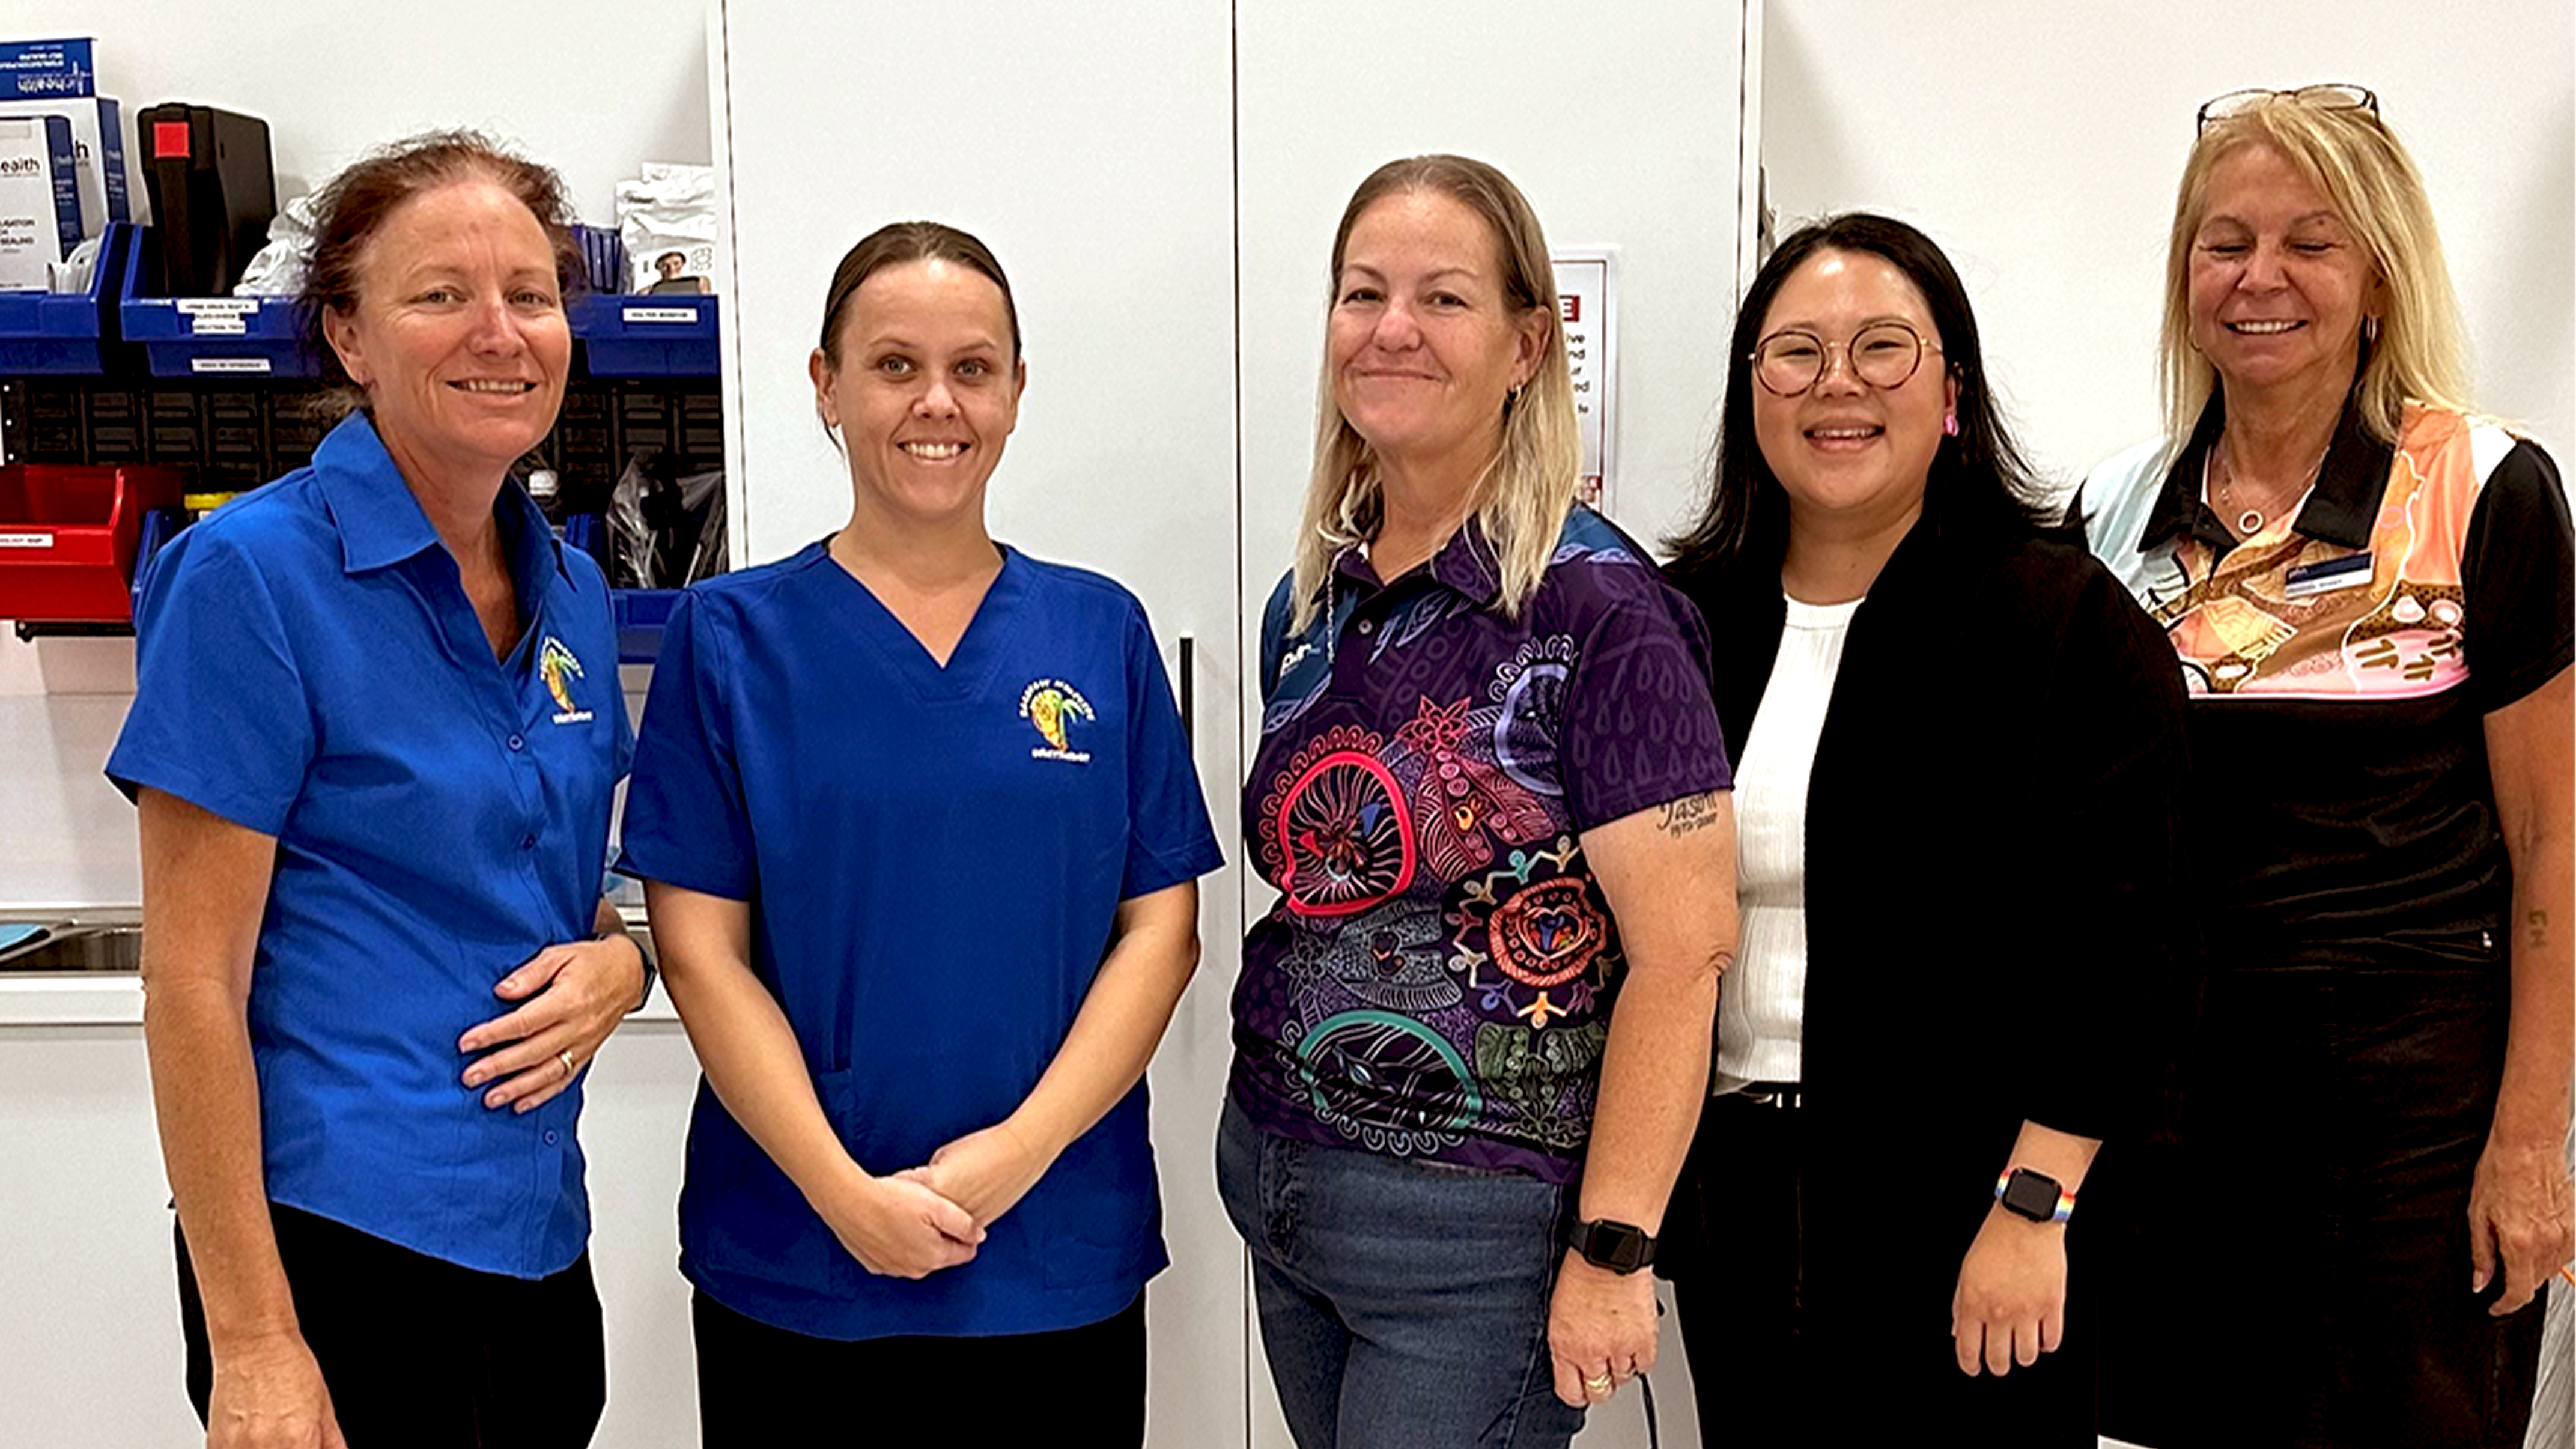 Barefoot Medicine Whitsundays Practice Manager Bel Gater (left) and team member Kayla Smith, pictured with NQPHN's Senior Primary Care Engagement Officer Debra Davis, Precedence Health Care representative Emma Walker, and NQPHN's Indigenous Health Project Officer Melinda Green.